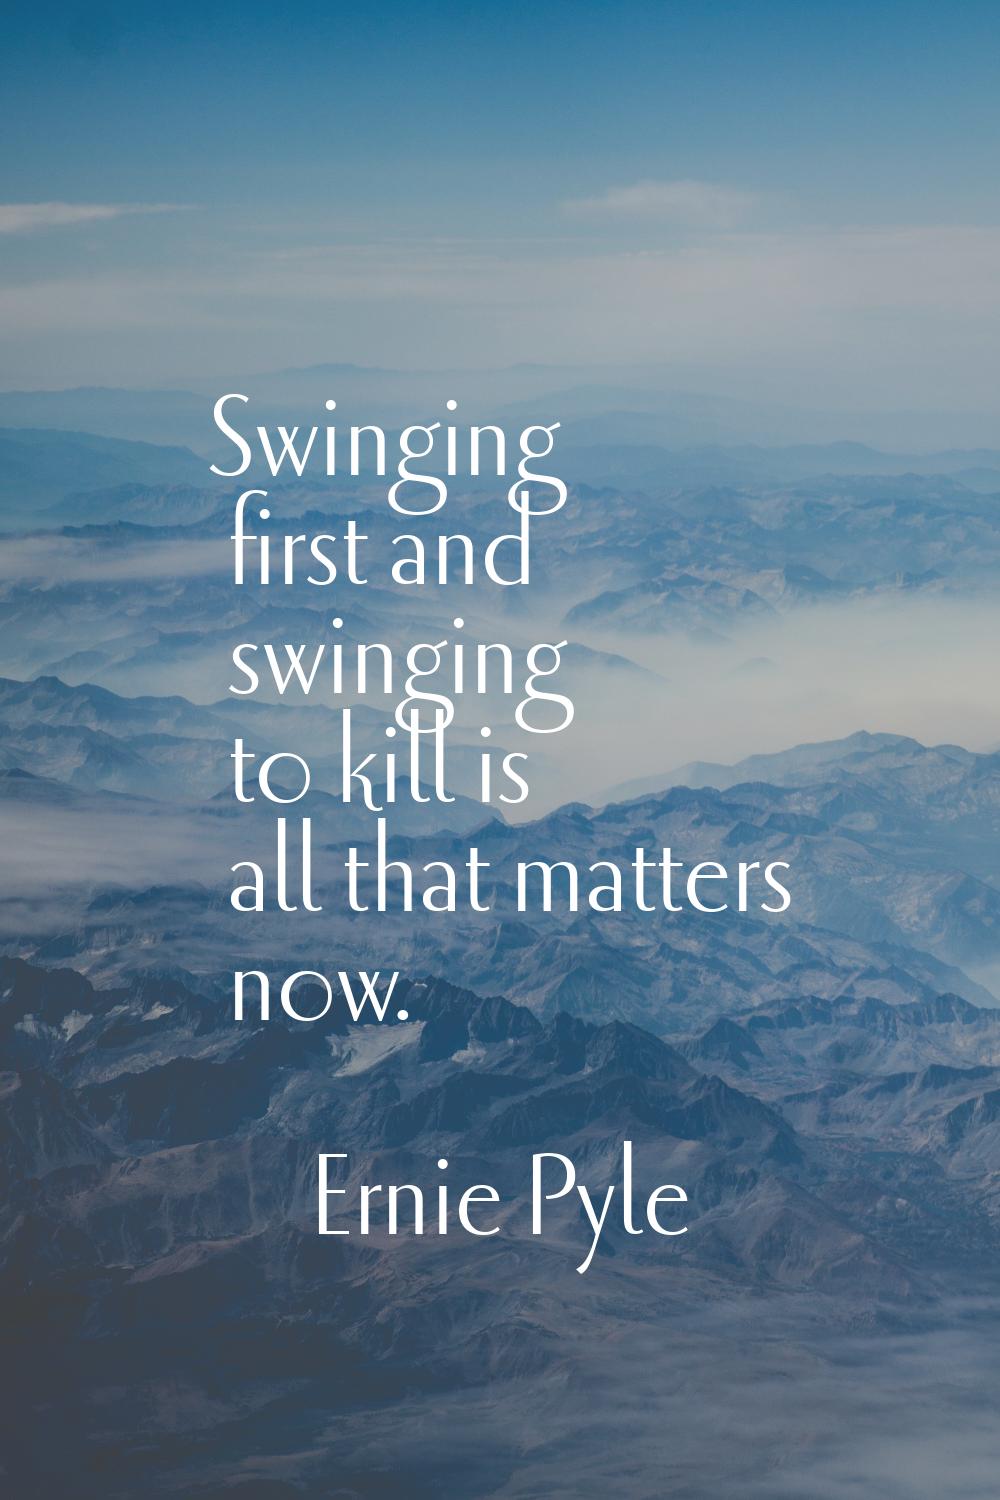 Swinging first and swinging to kill is all that matters now.